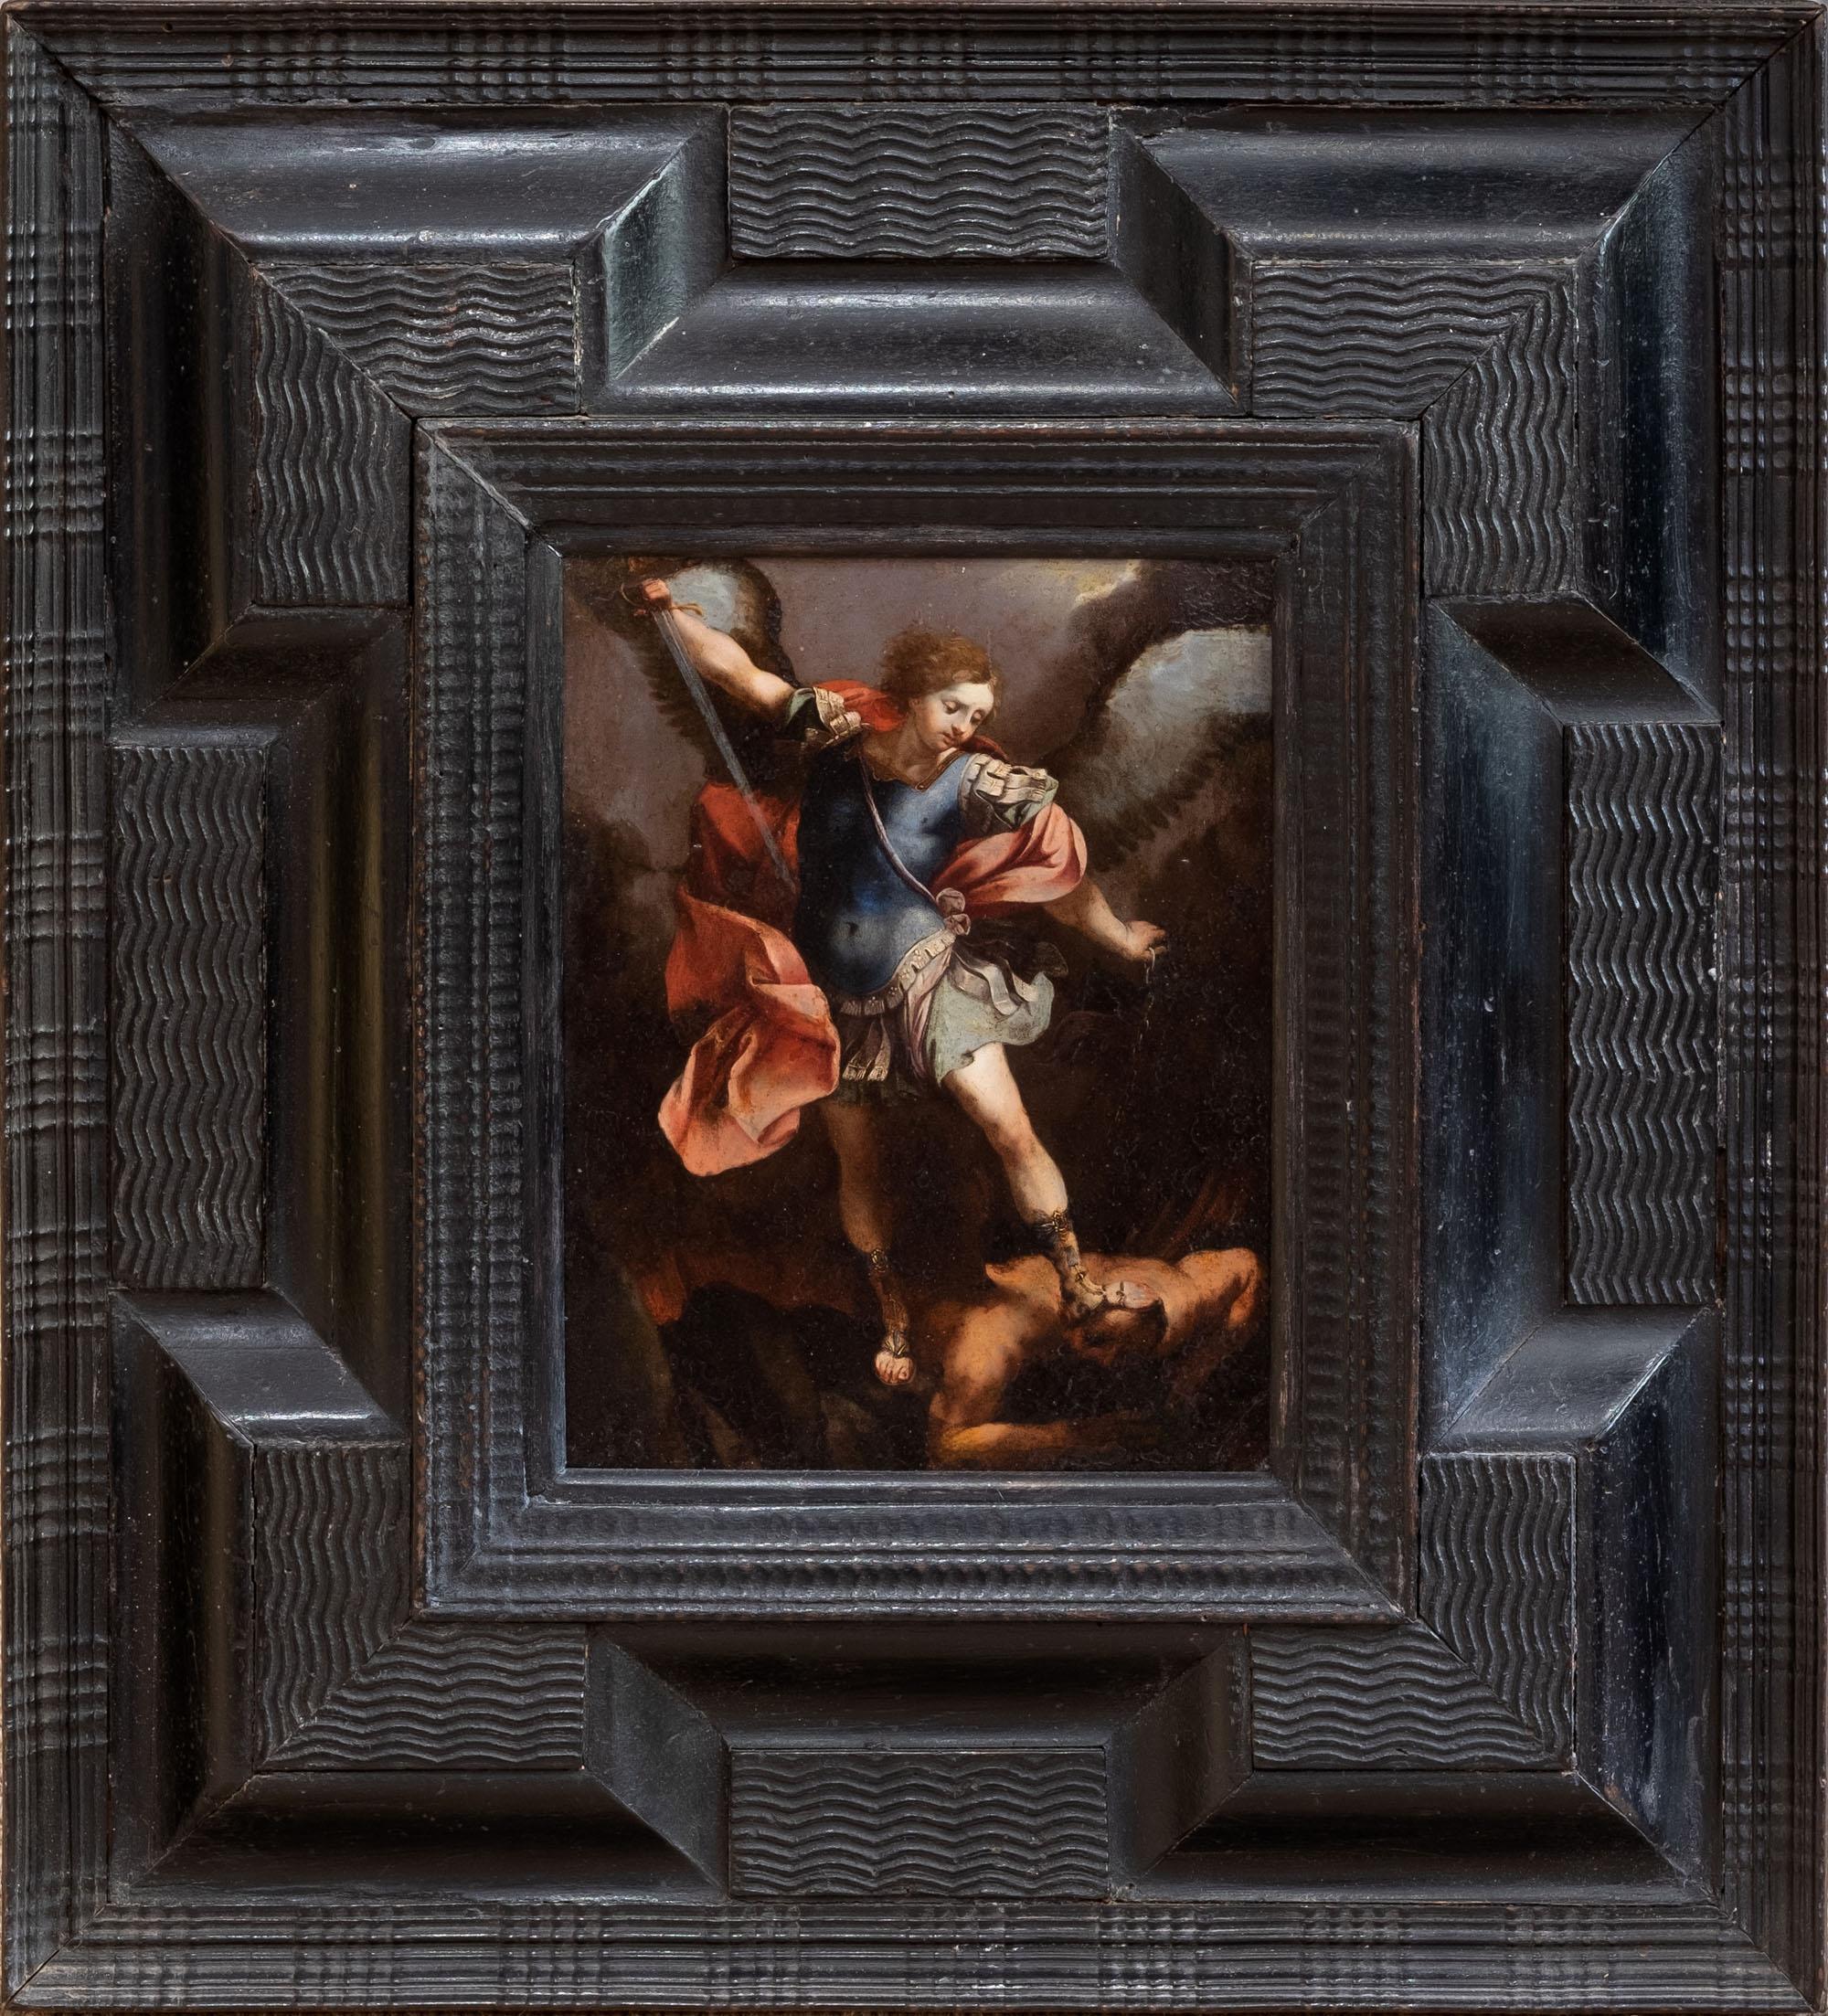 Unknown Figurative Painting - The Archangel Michael Defeating Satan